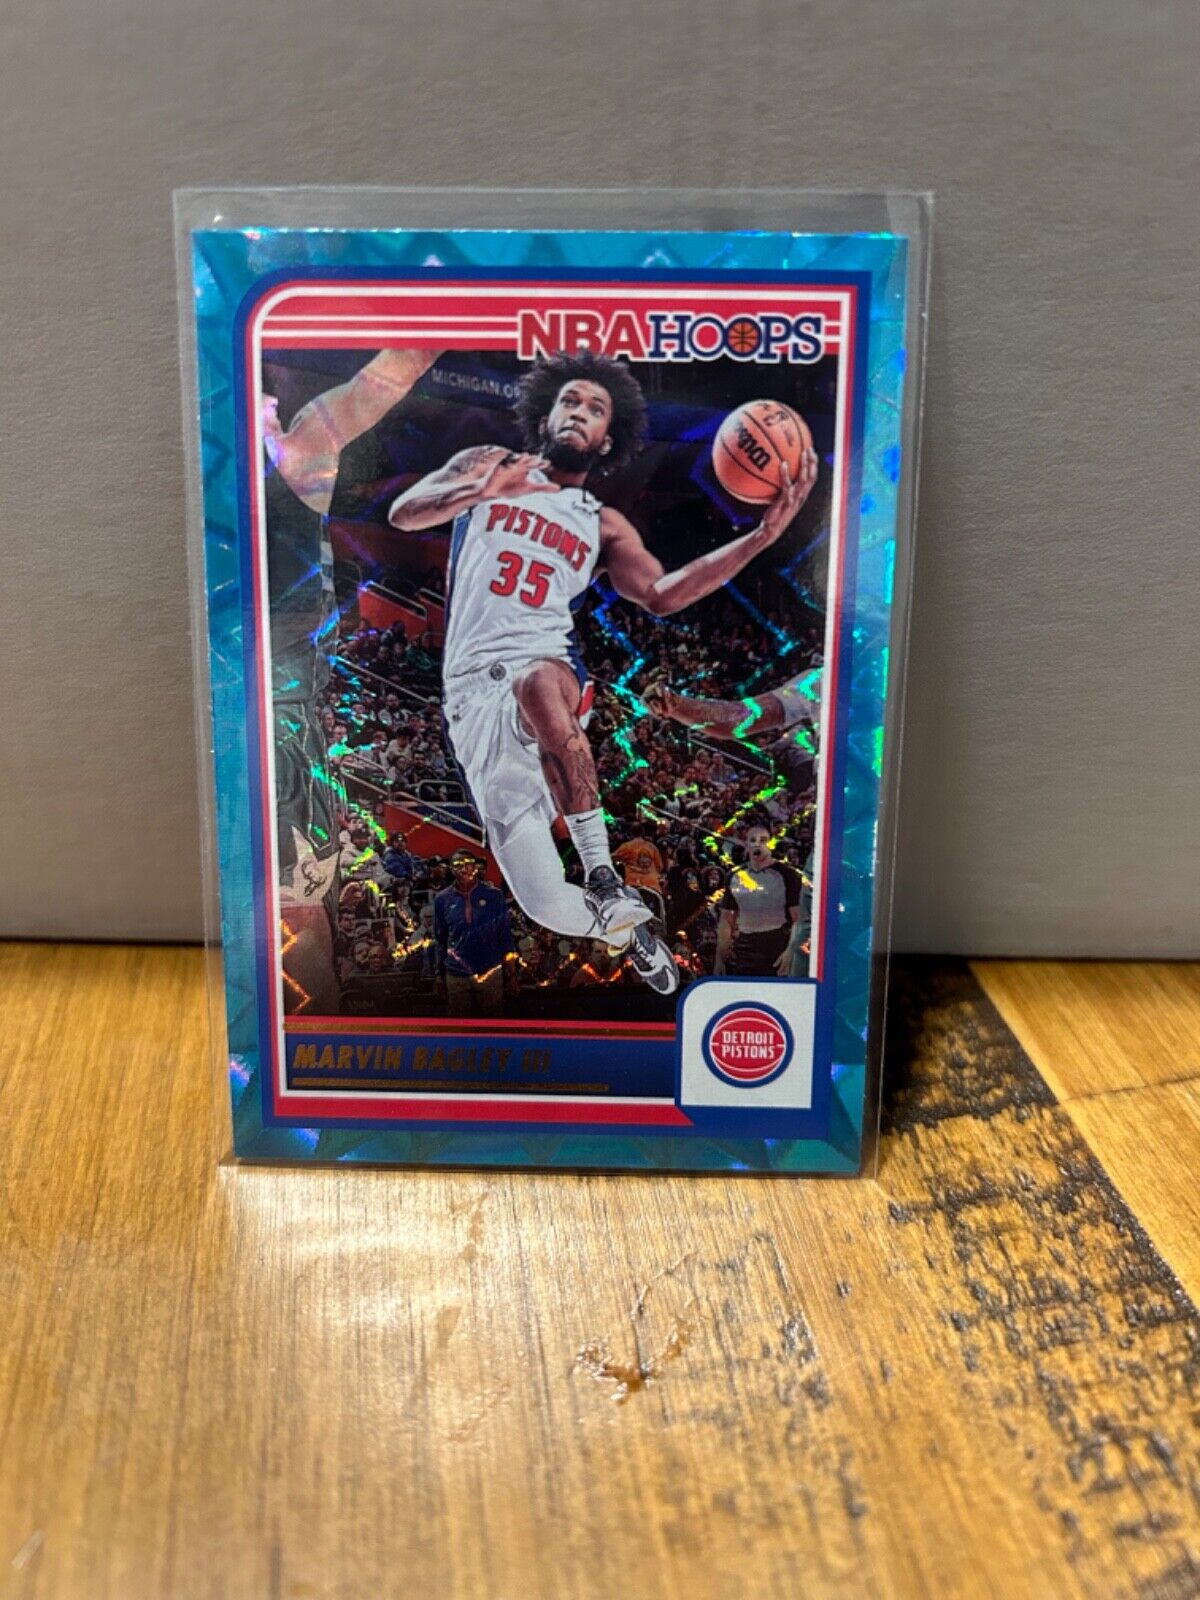 Panini NBA Hoops Basketball Cards Ending Soonest without Bids - A